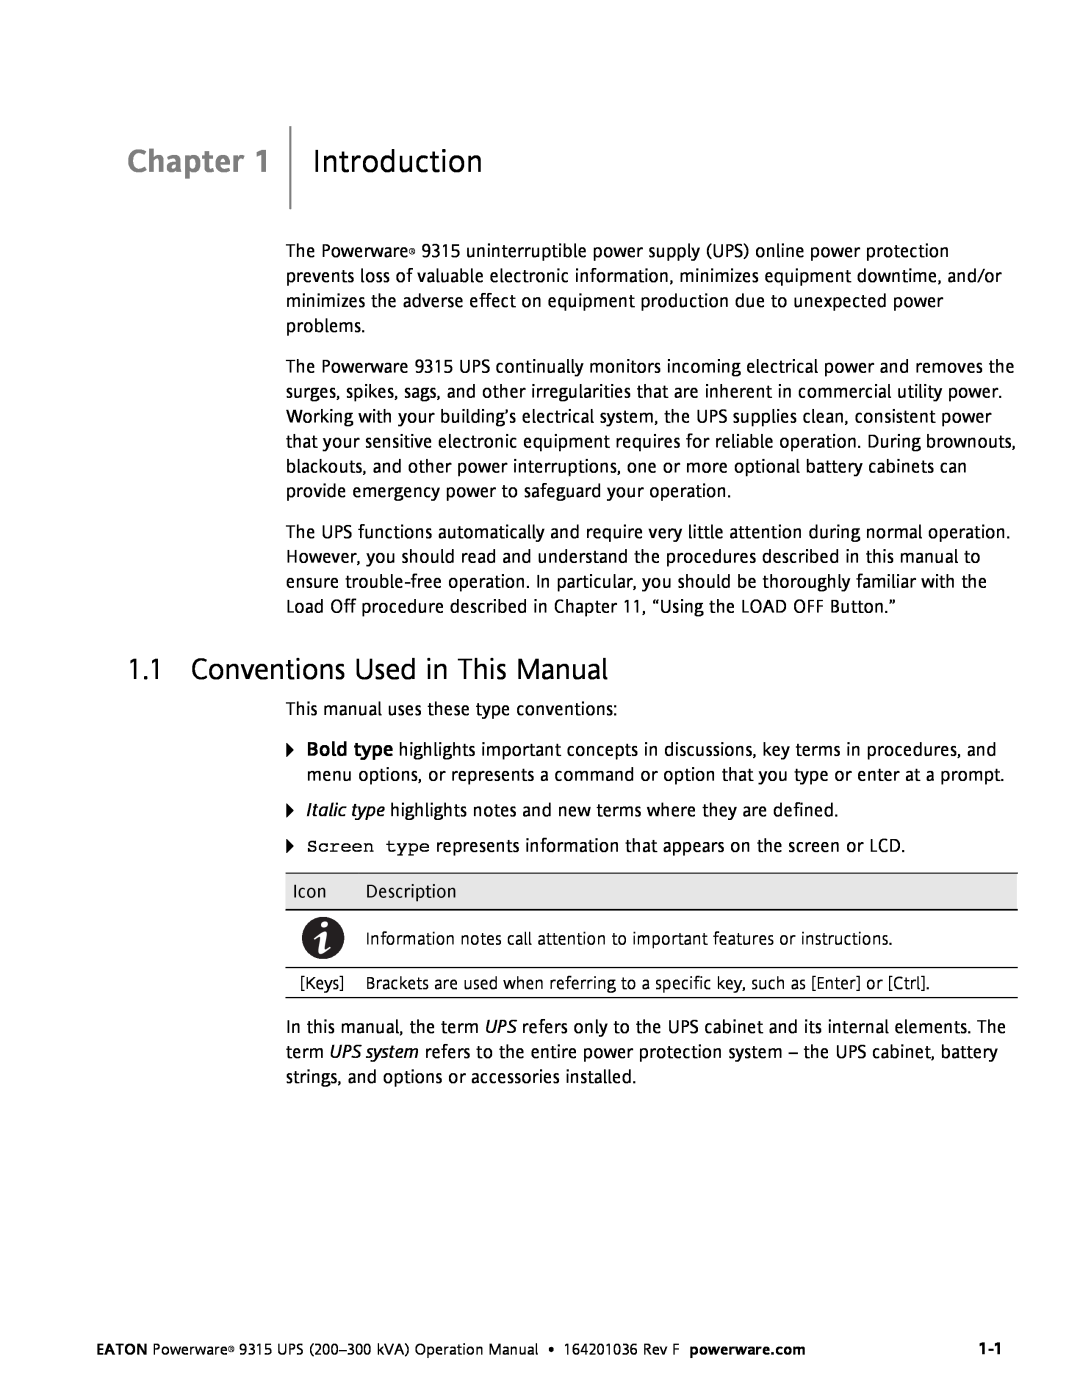 Eaton Electrical Powerware 9315 operation manual Chapter, Introduction, Conventions Used in This Manual 